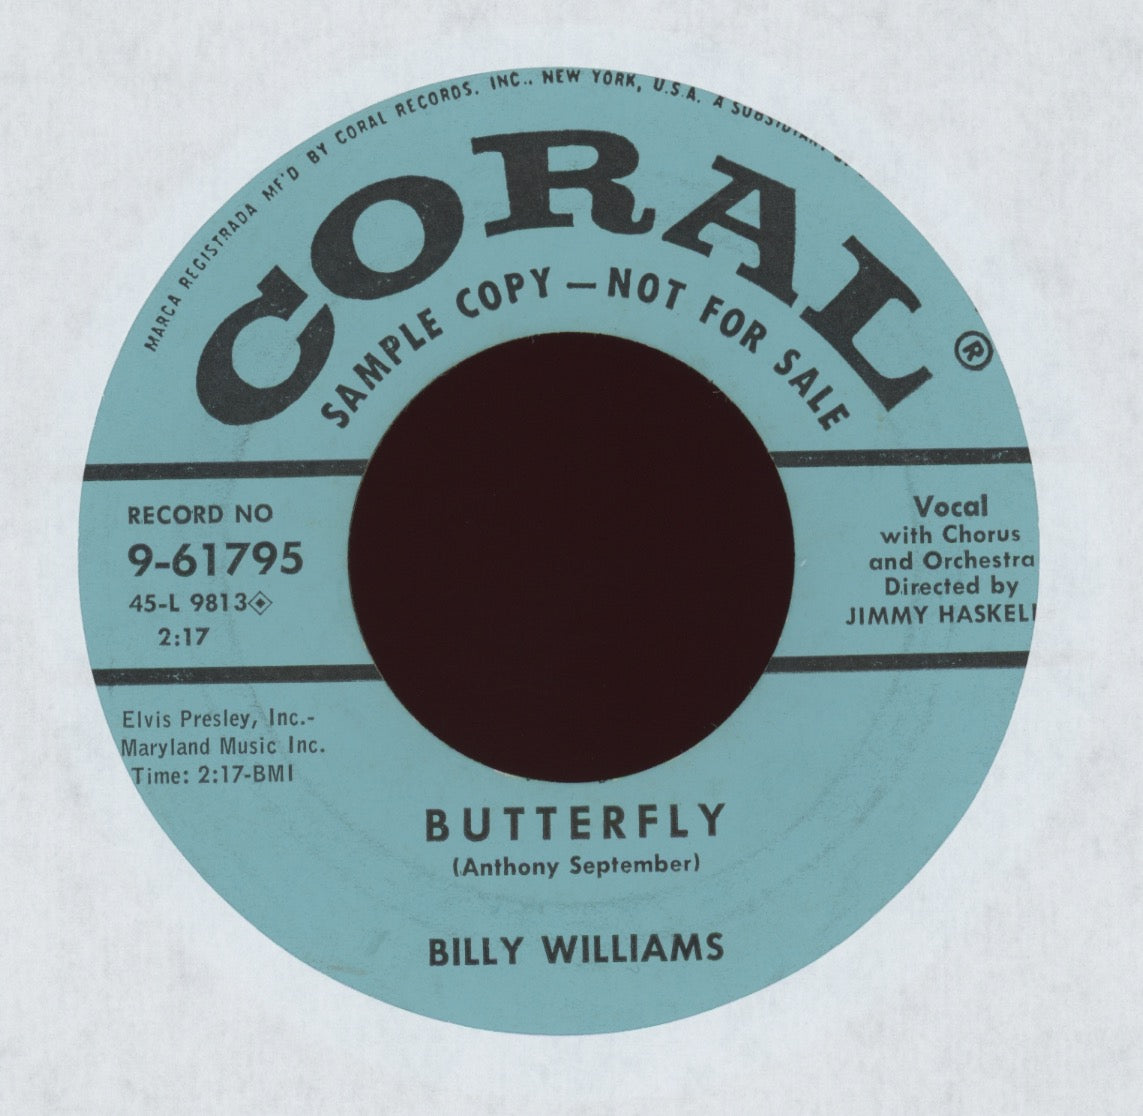 Billy Williams - The Pied Piper on Coral Promo